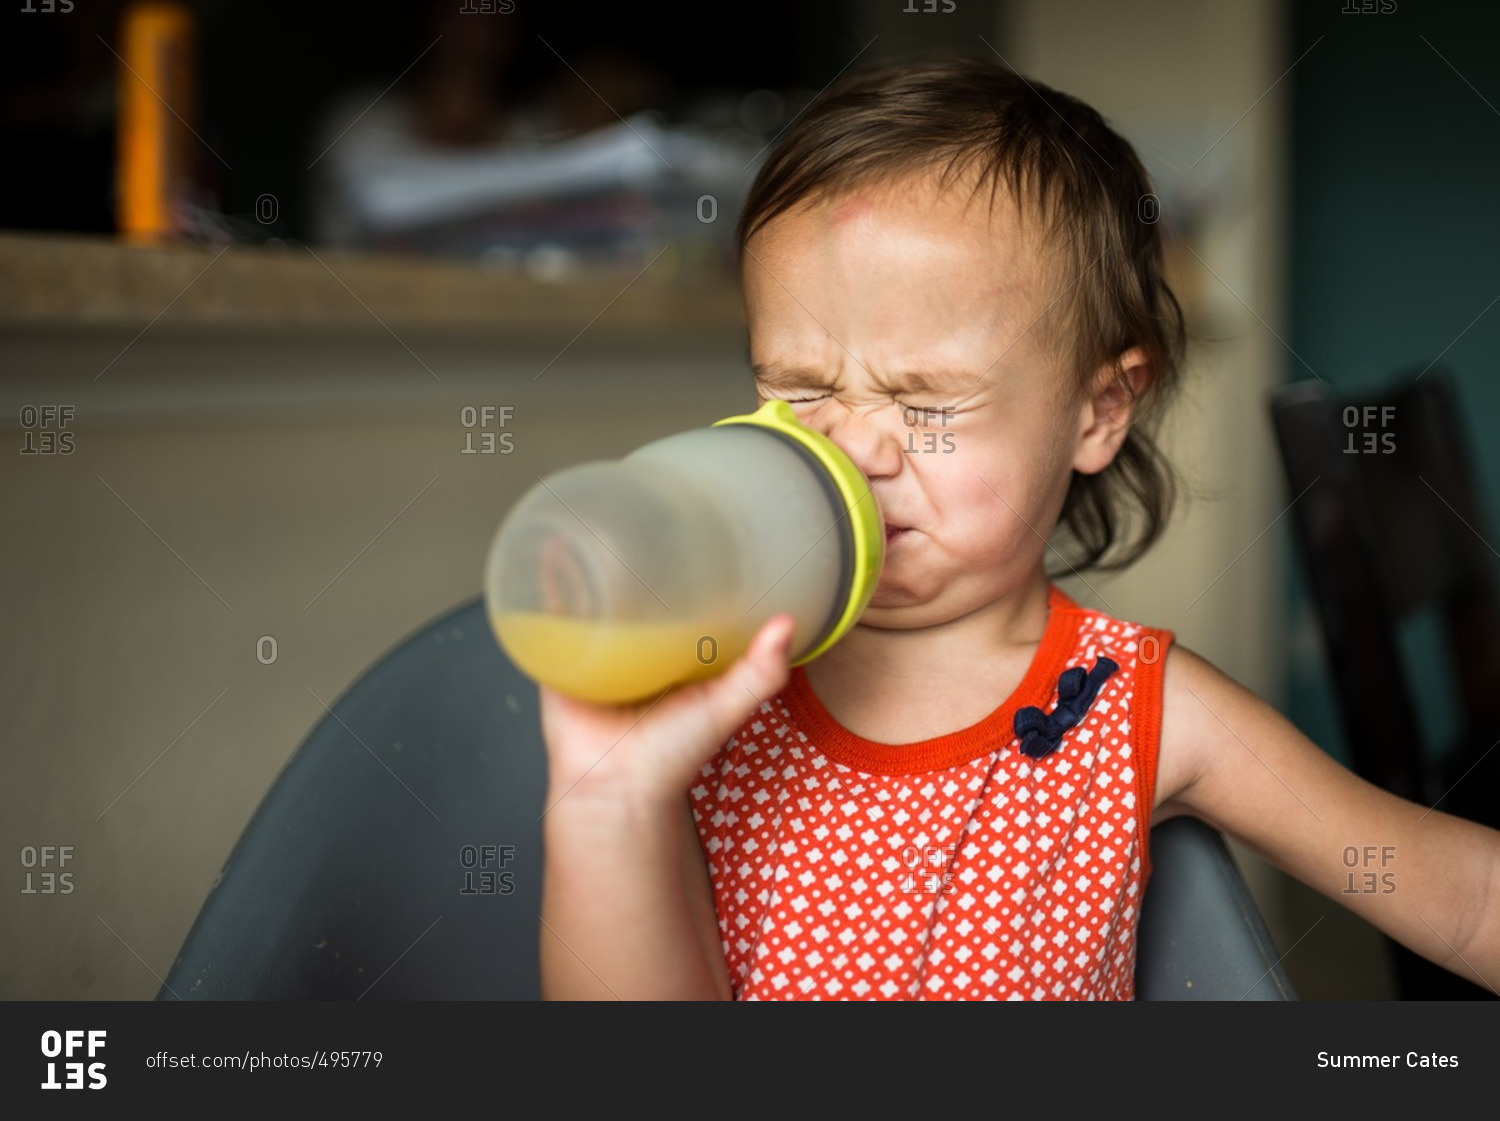 Toddler girl making sour face while sipping on a juice cup